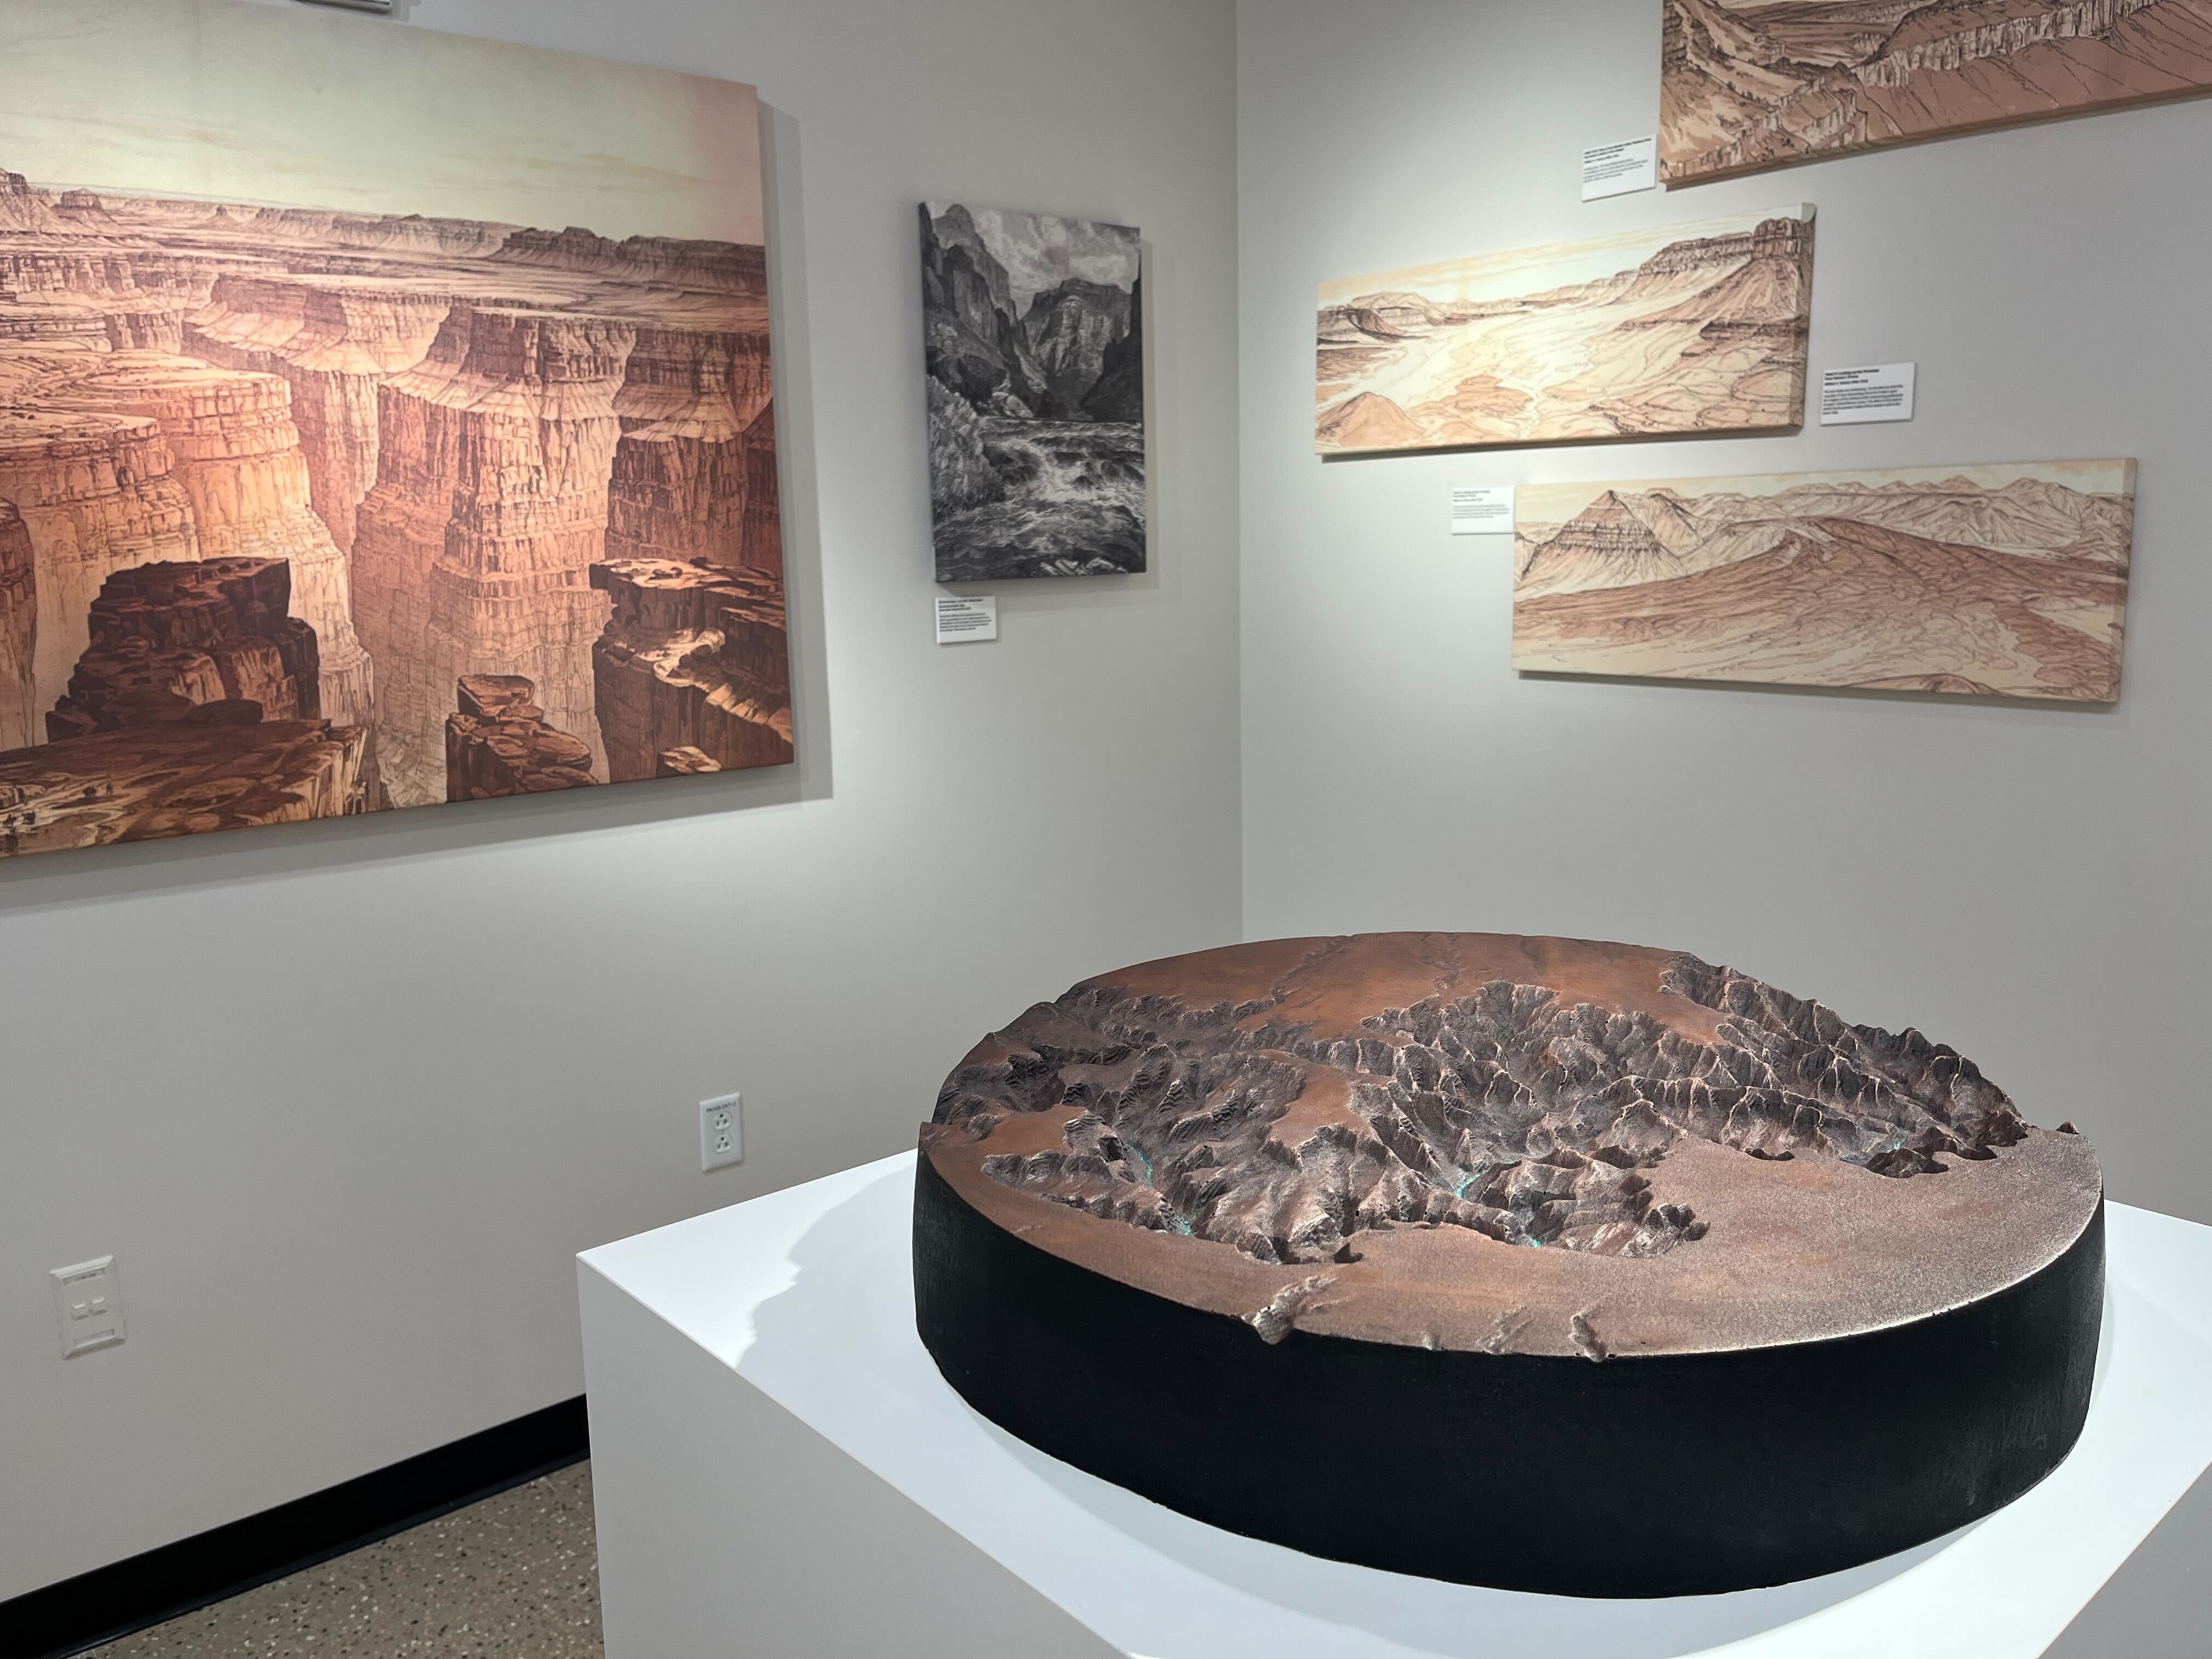 Photographs and objects on display of the Grand Canyon